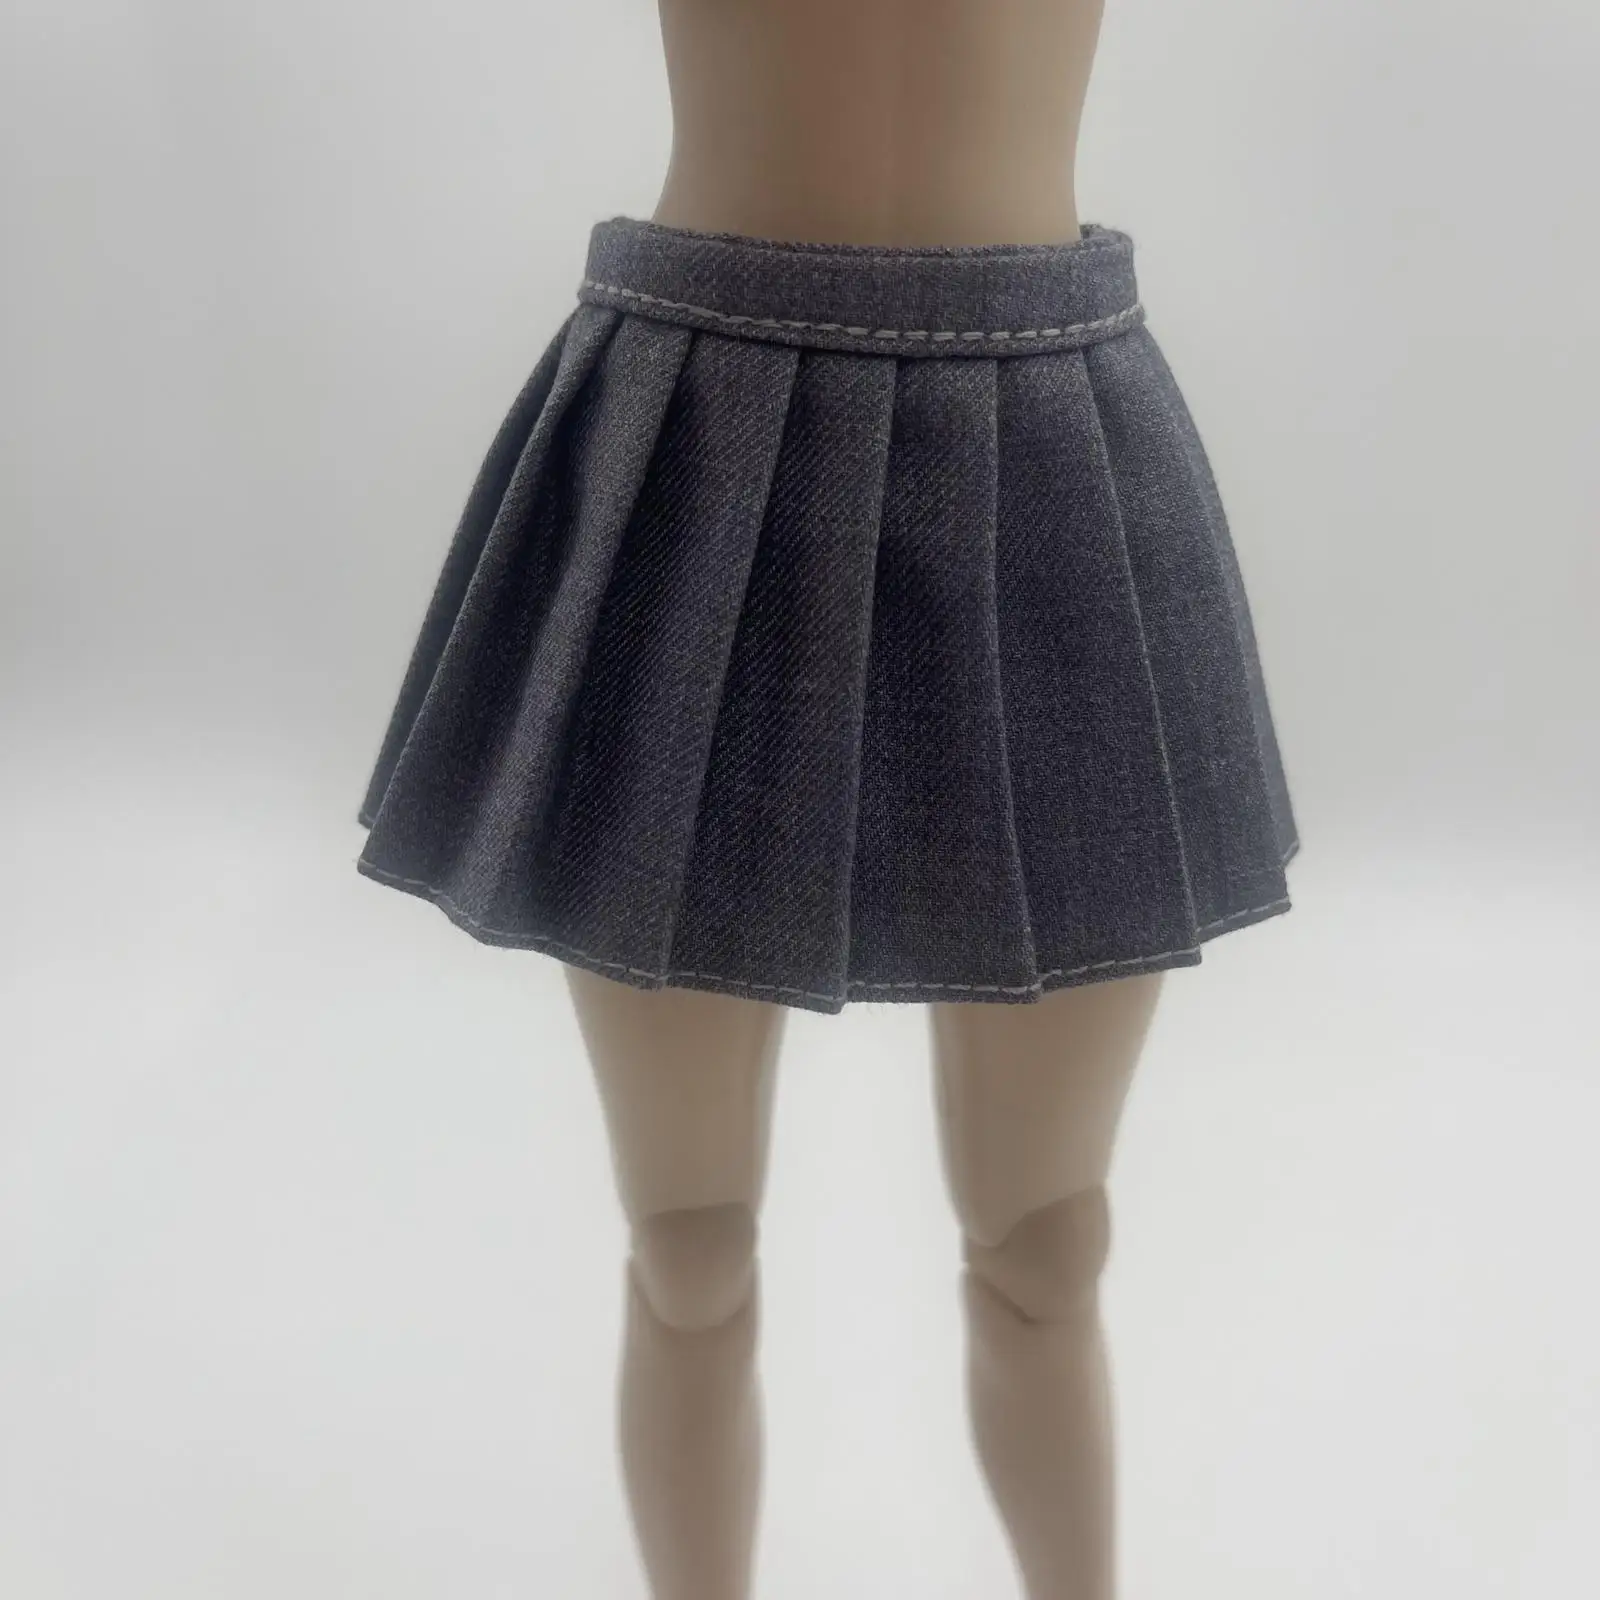 1:6 Womans Pleated Skirt for 12`` Action Figure Body Accessories Dress up